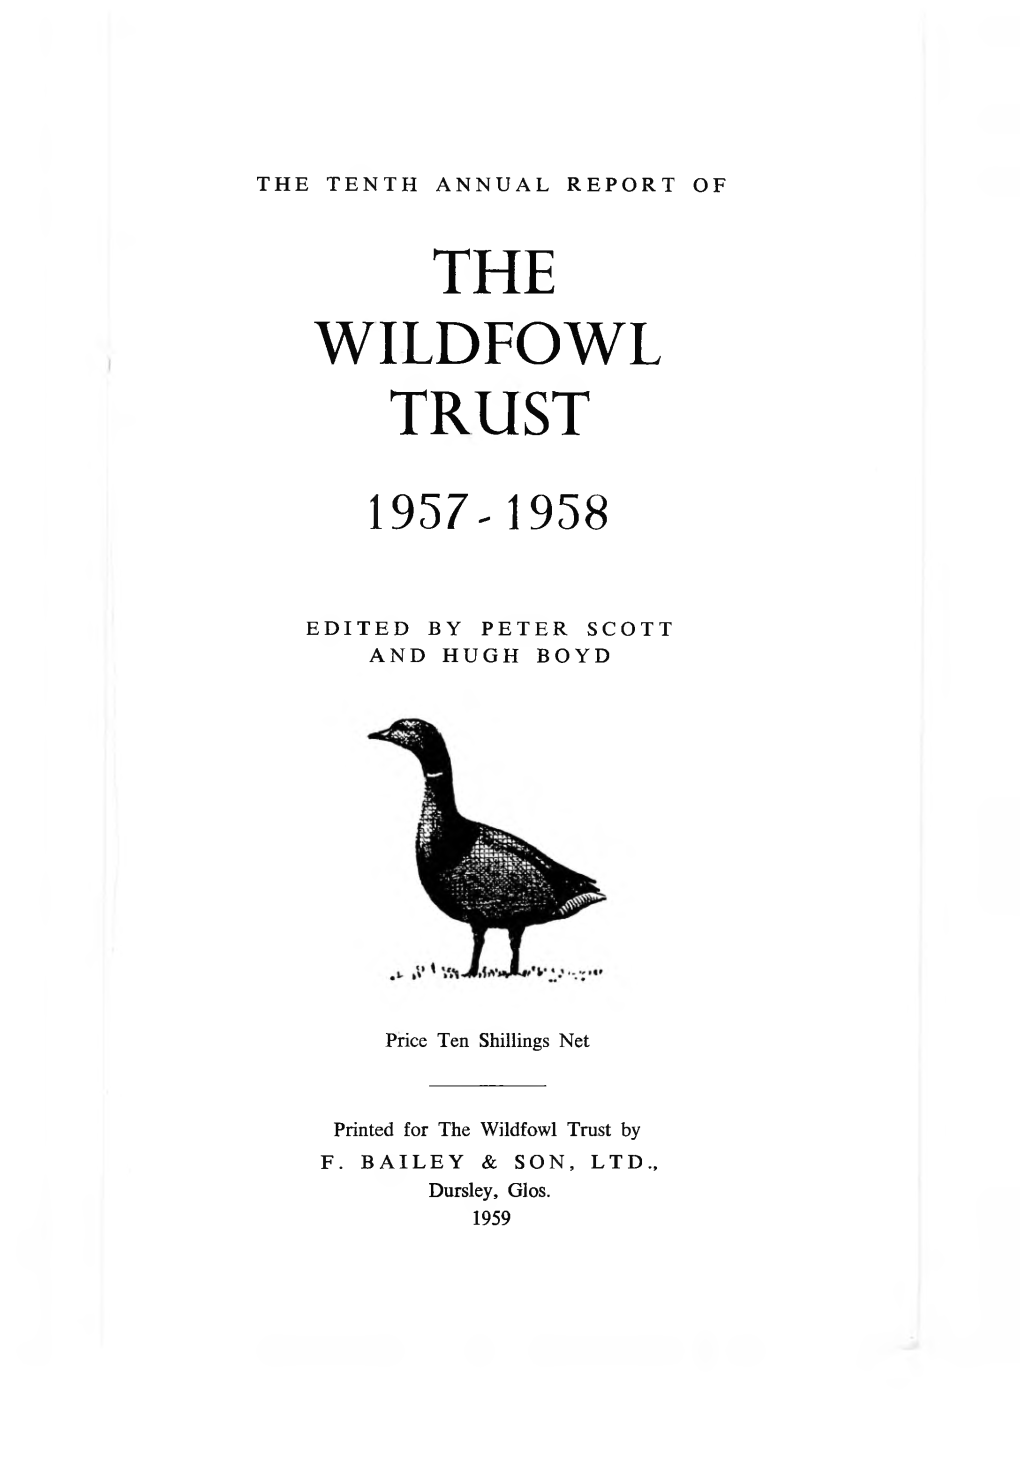 The Wildfowl Trust